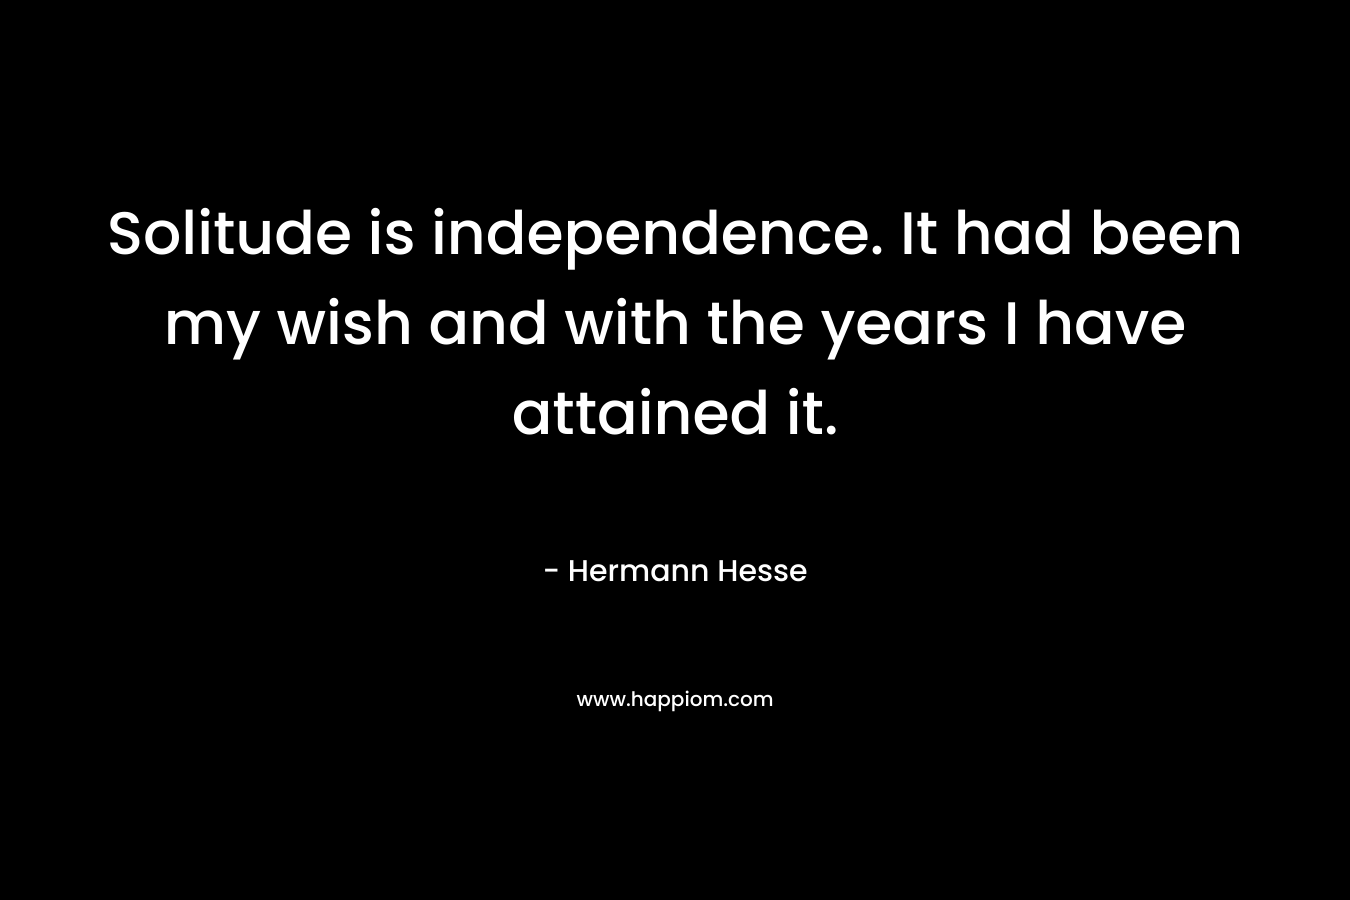 Solitude is independence. It had been my wish and with the years I have attained it. – Hermann Hesse